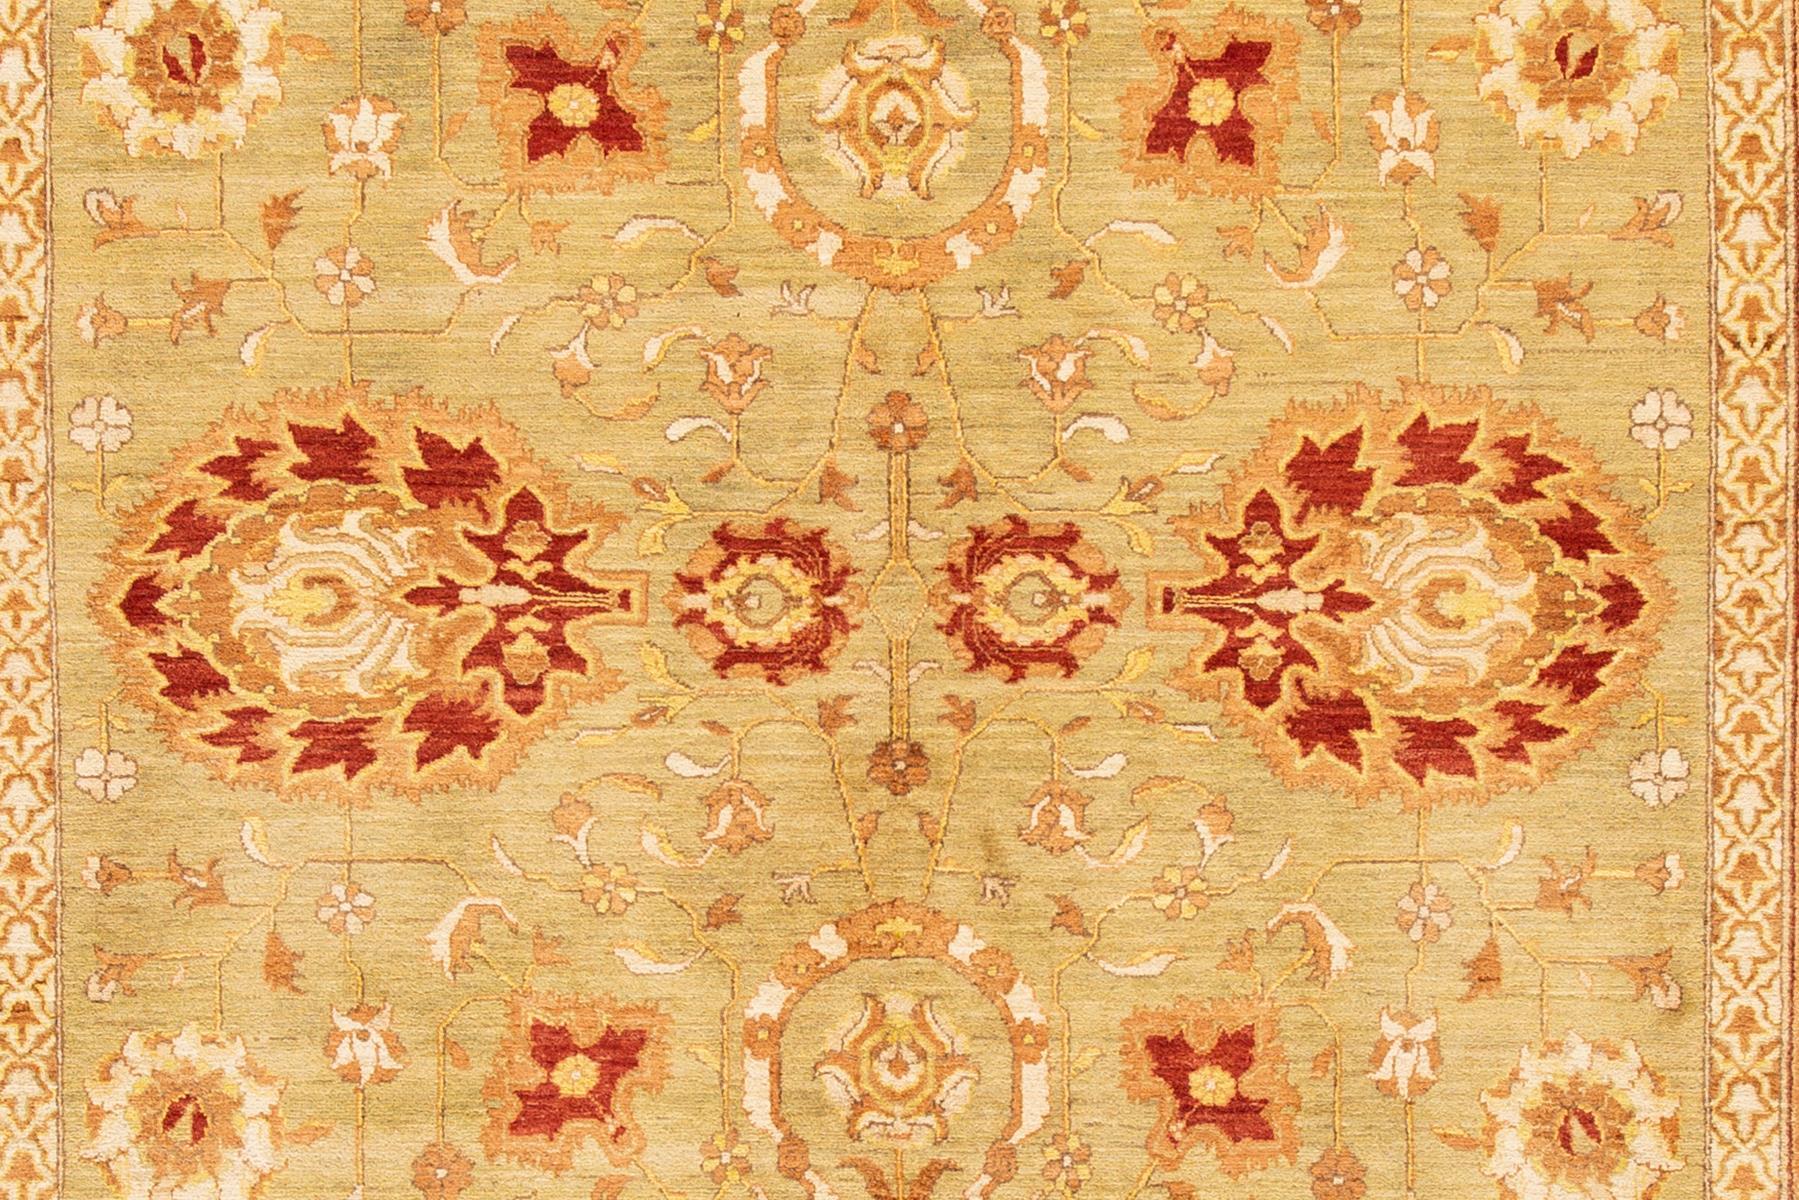 Modern Indian Peshawar rug with an all over floral design. This piece has fine details, great colors, and a beautiful design. It would be the perfect addition to your home. This rug measures: 10'3